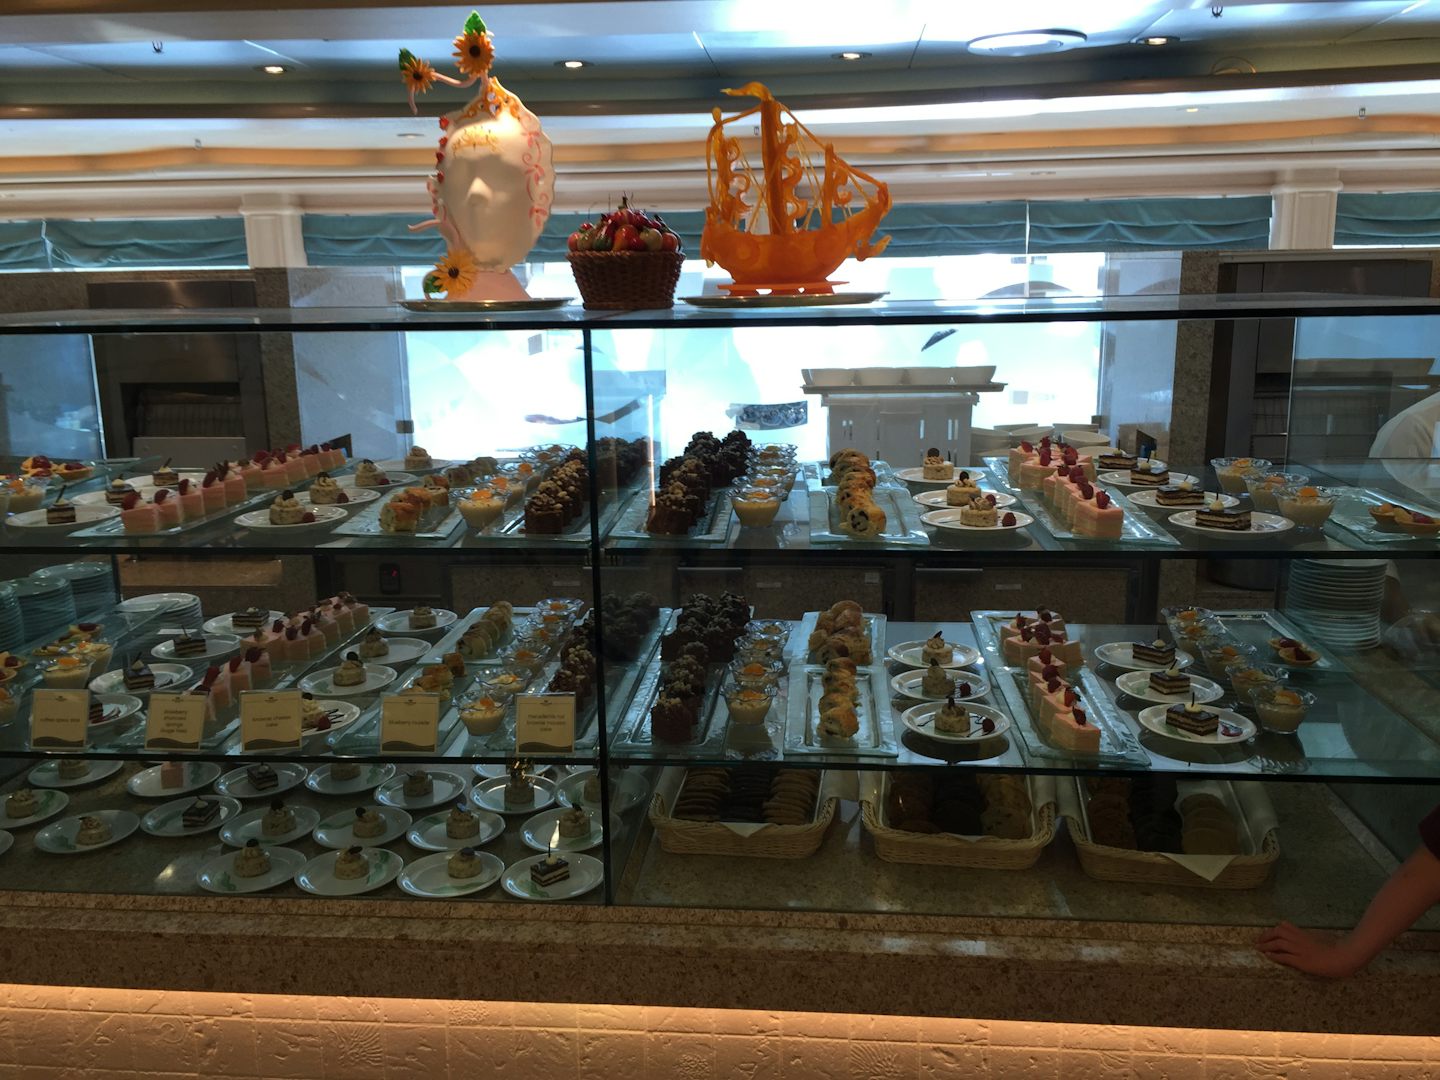 Sweets on display in Horizon Court